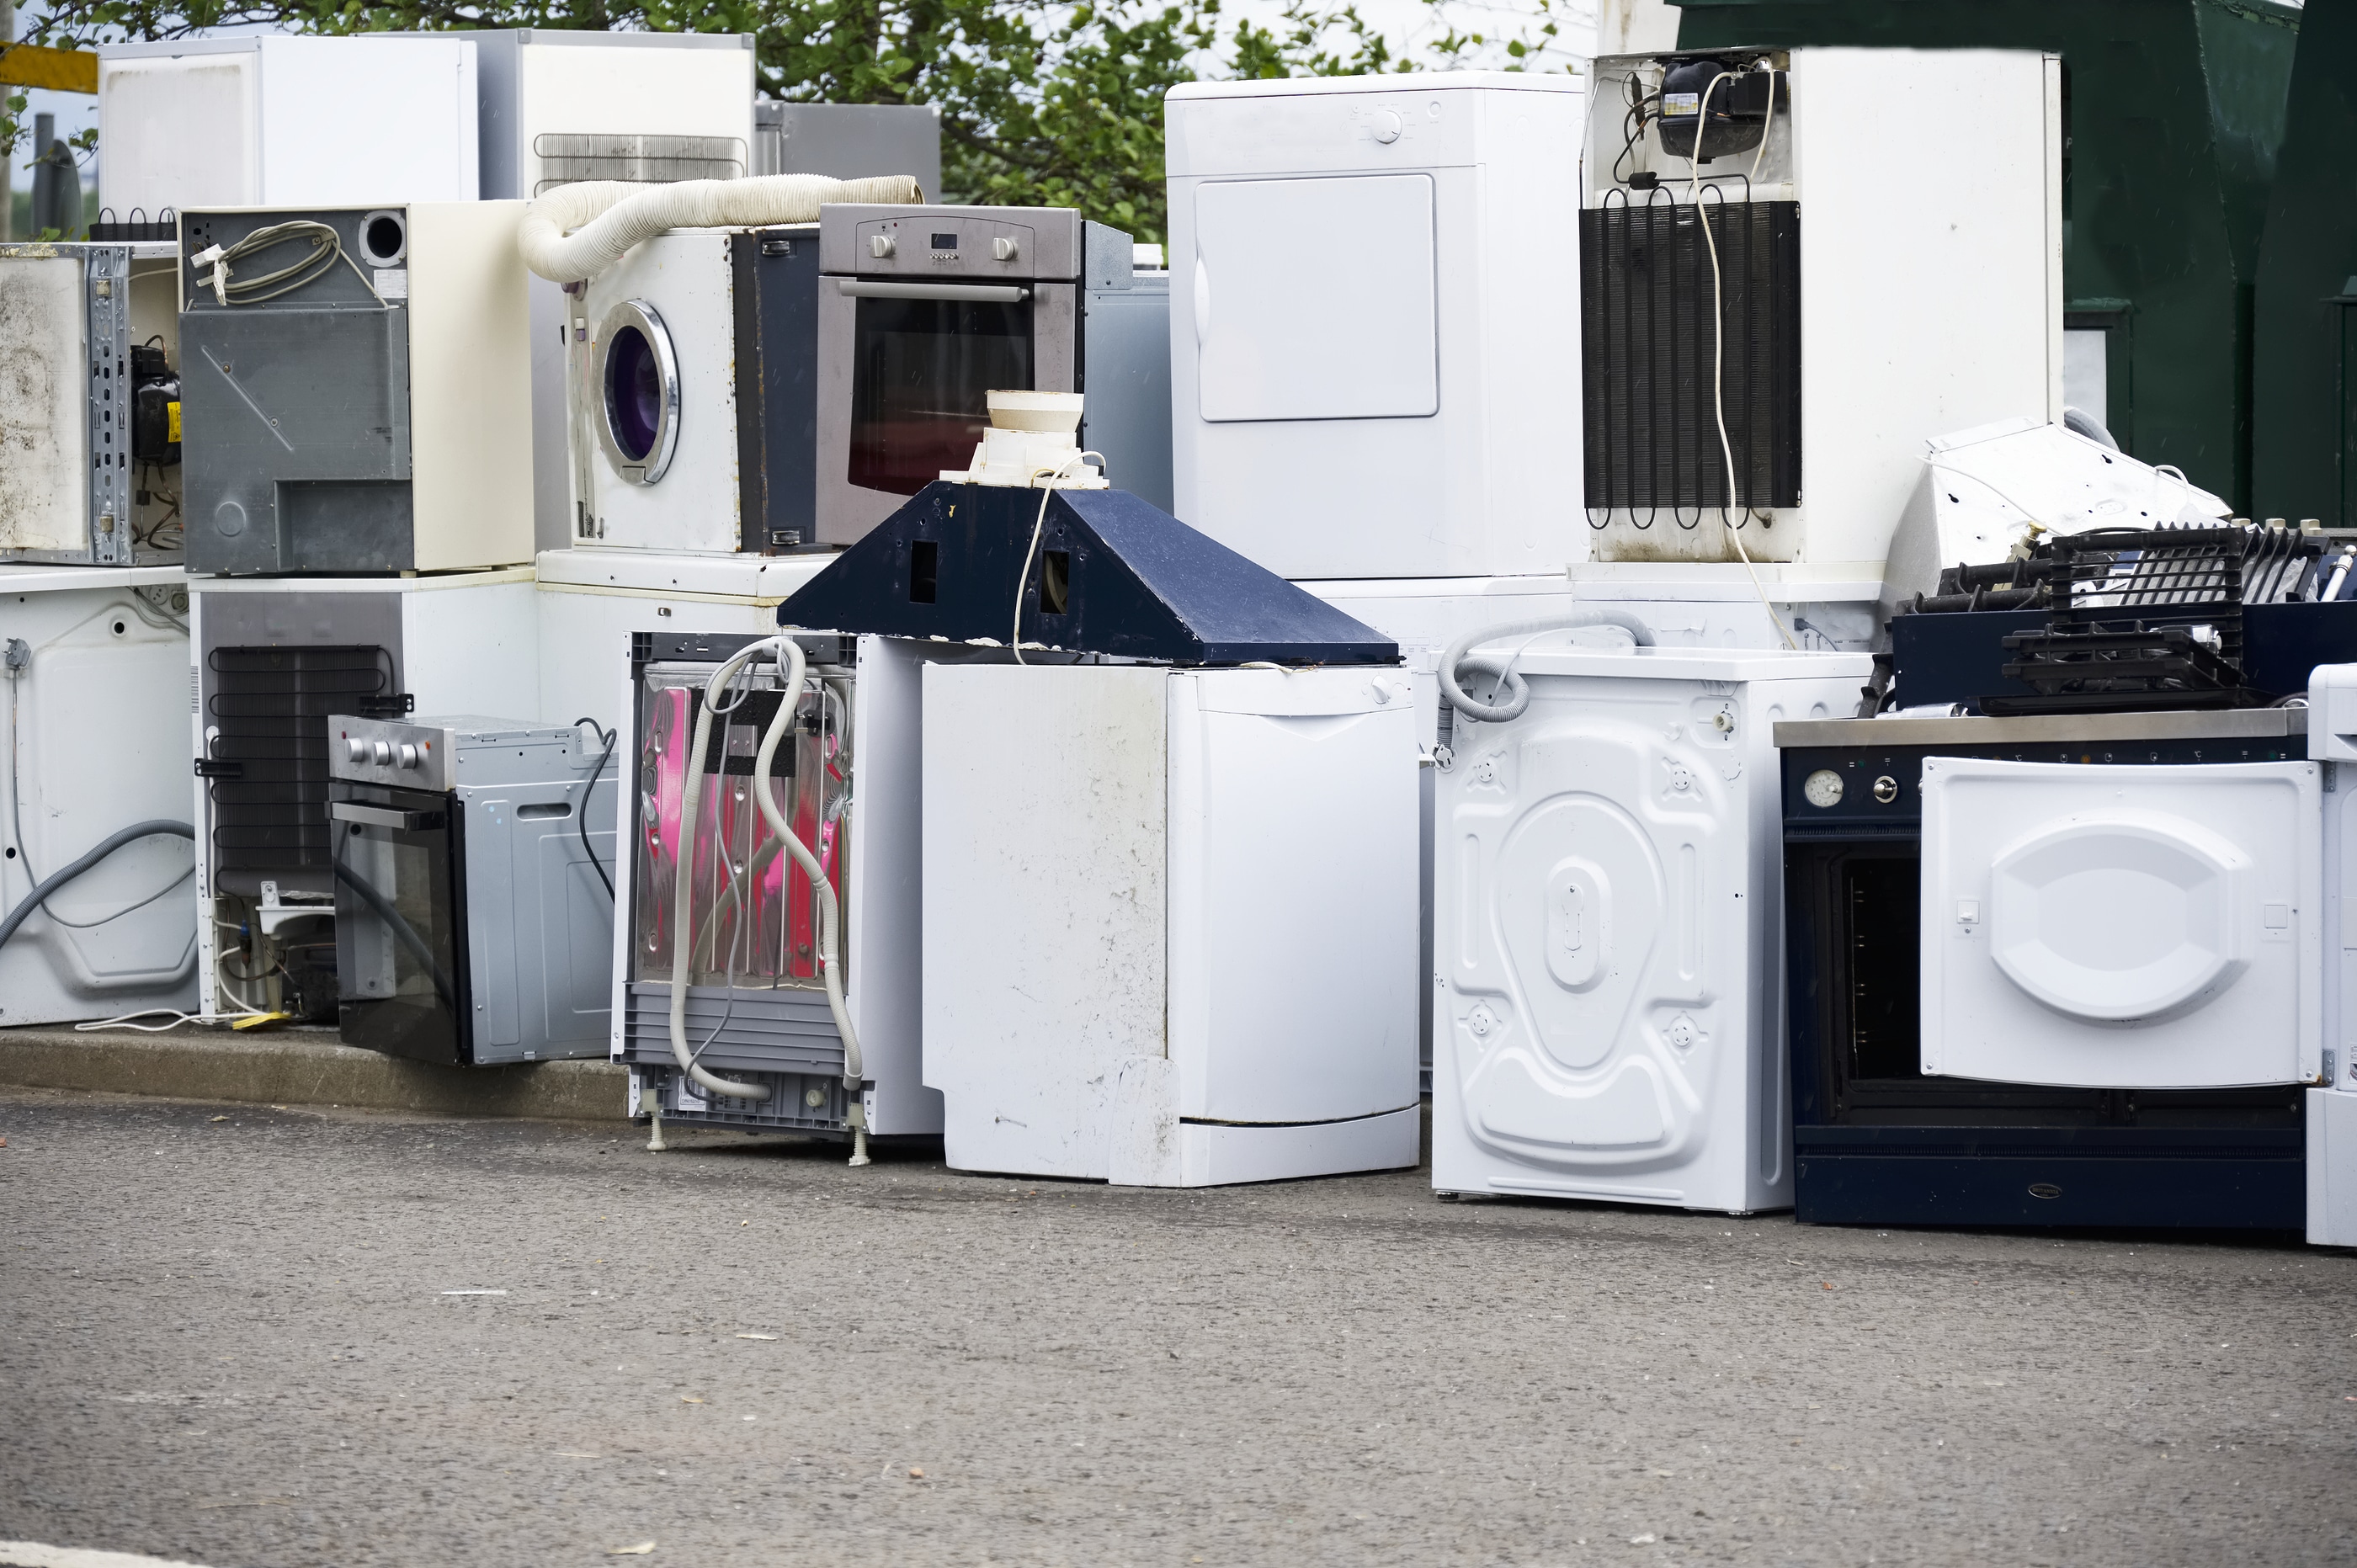 https://www.abcjunk.com/wp-content/uploads/2021/11/3-Reasons-To-Recycle-Old-Appliances.jpg